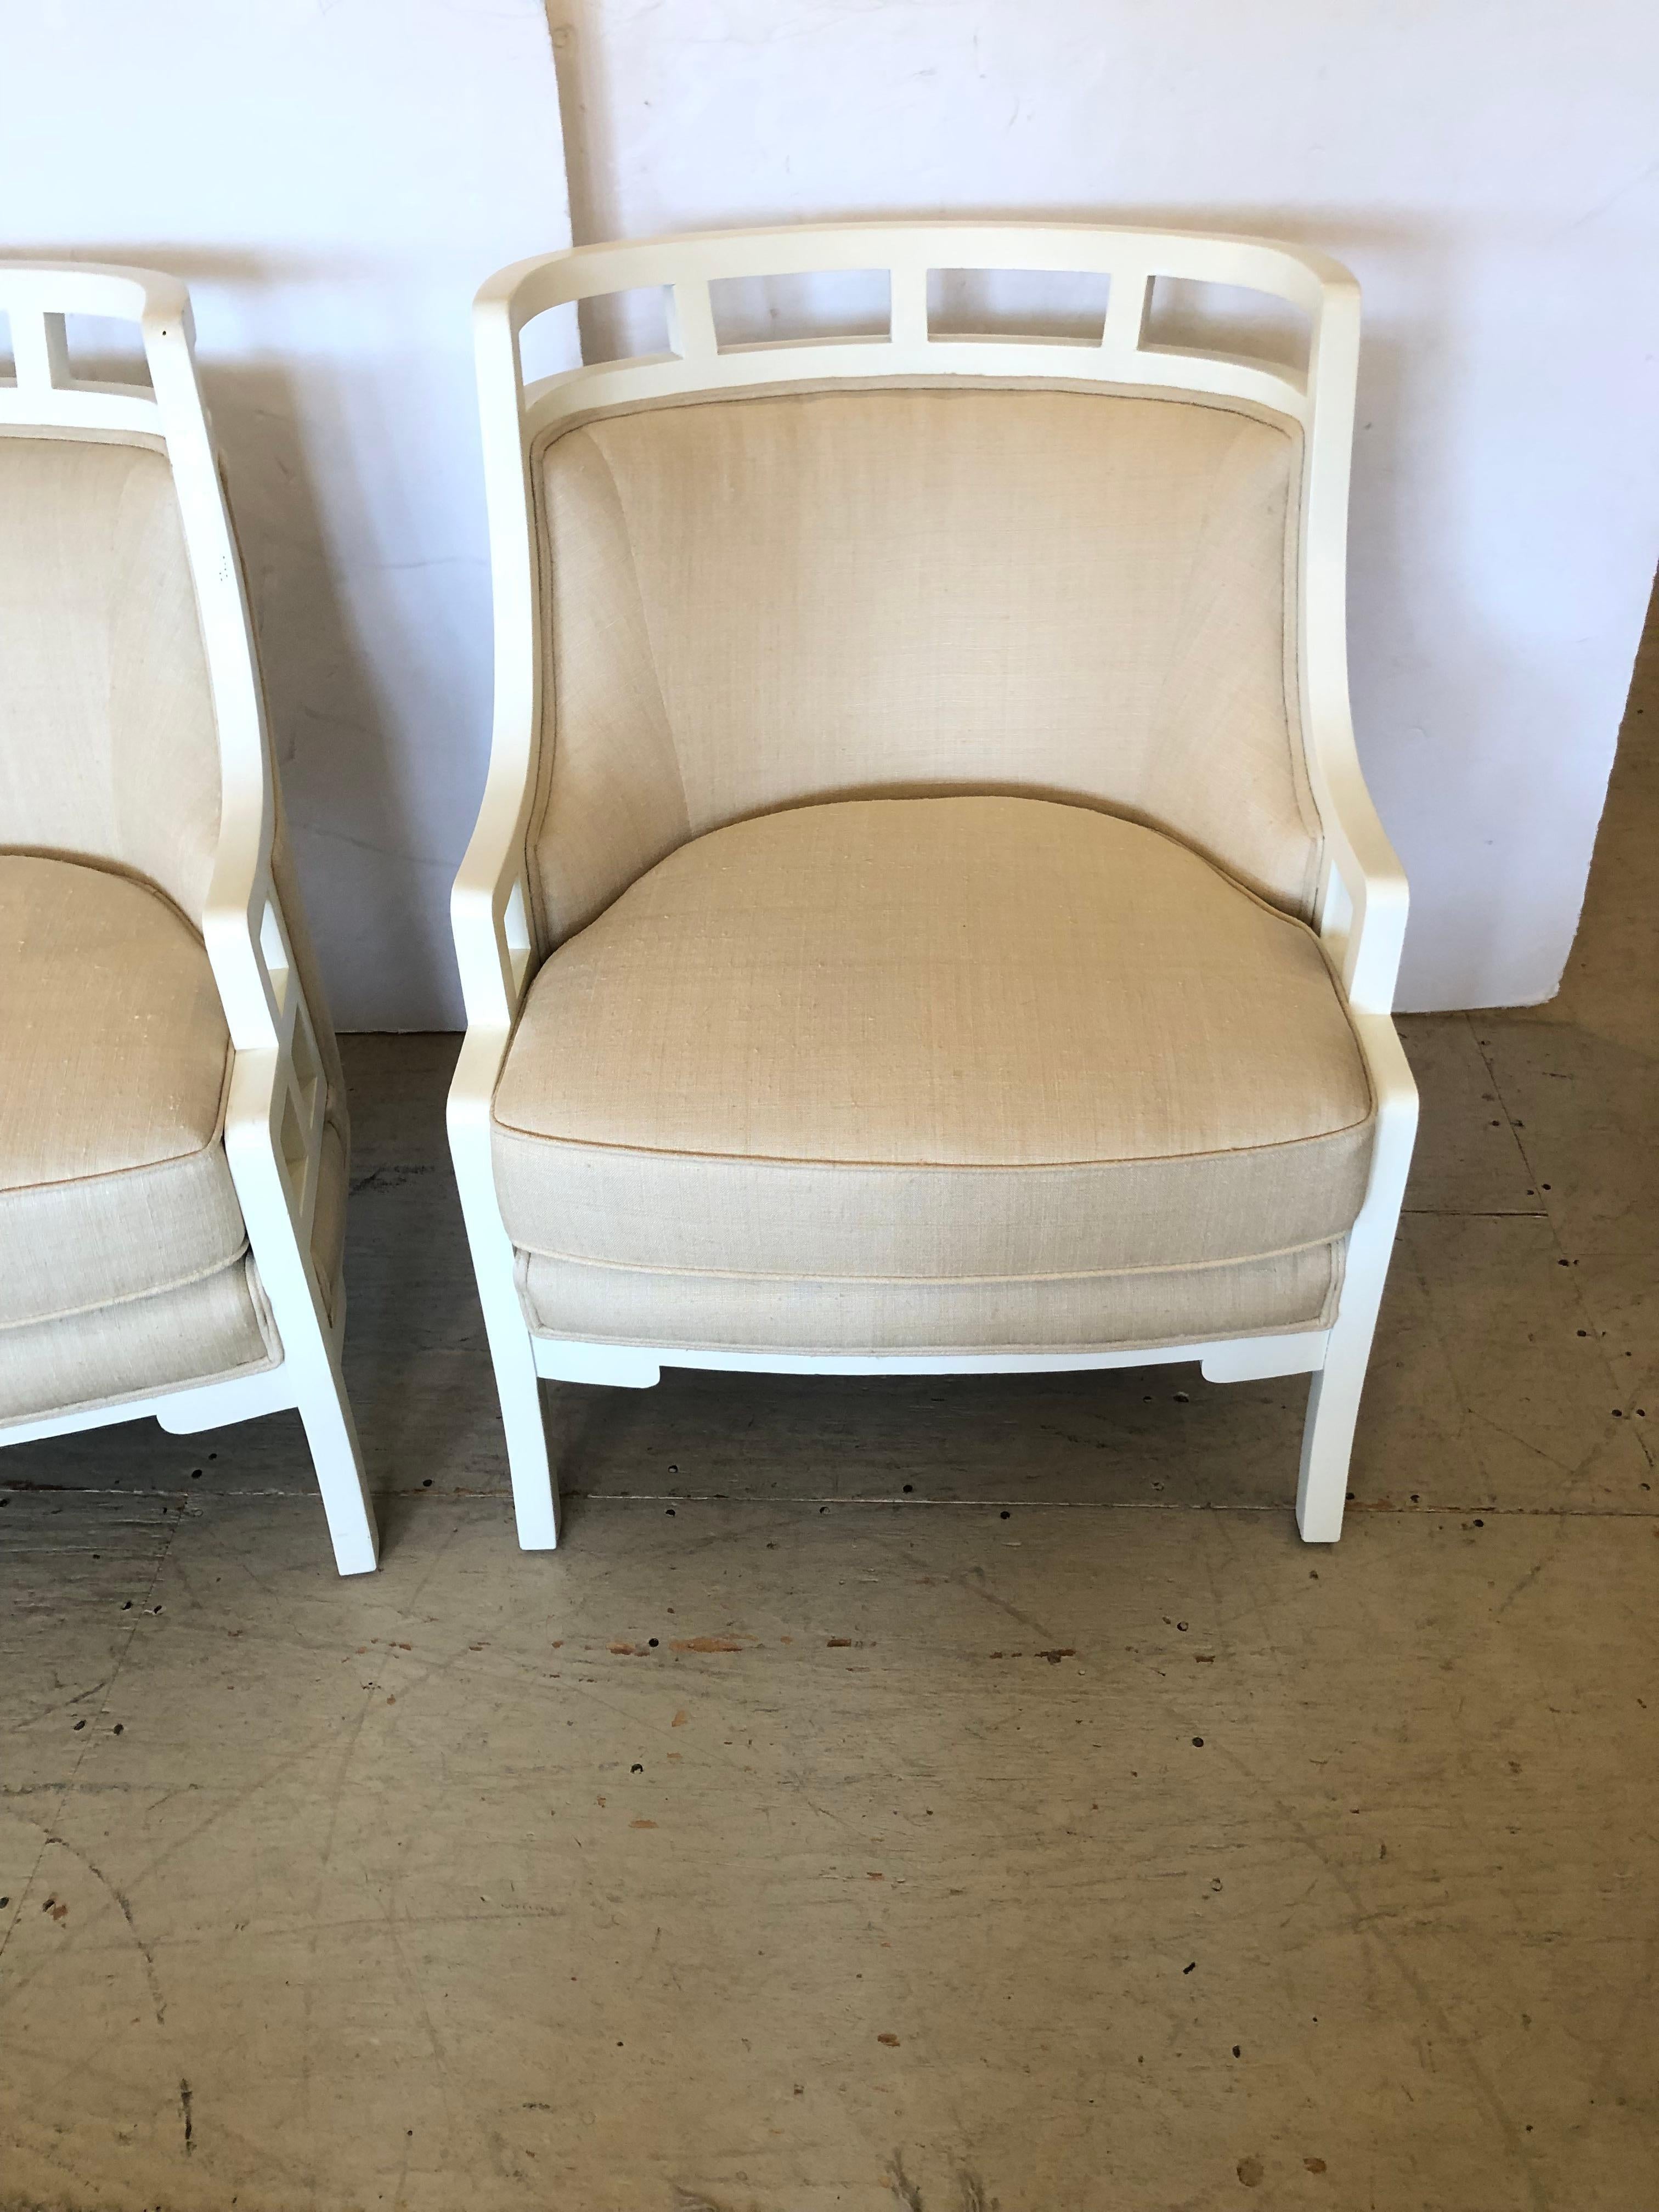 Chic Pair of White Painted Barrel Back Club Chairs Upholstered in Linen For Sale 6